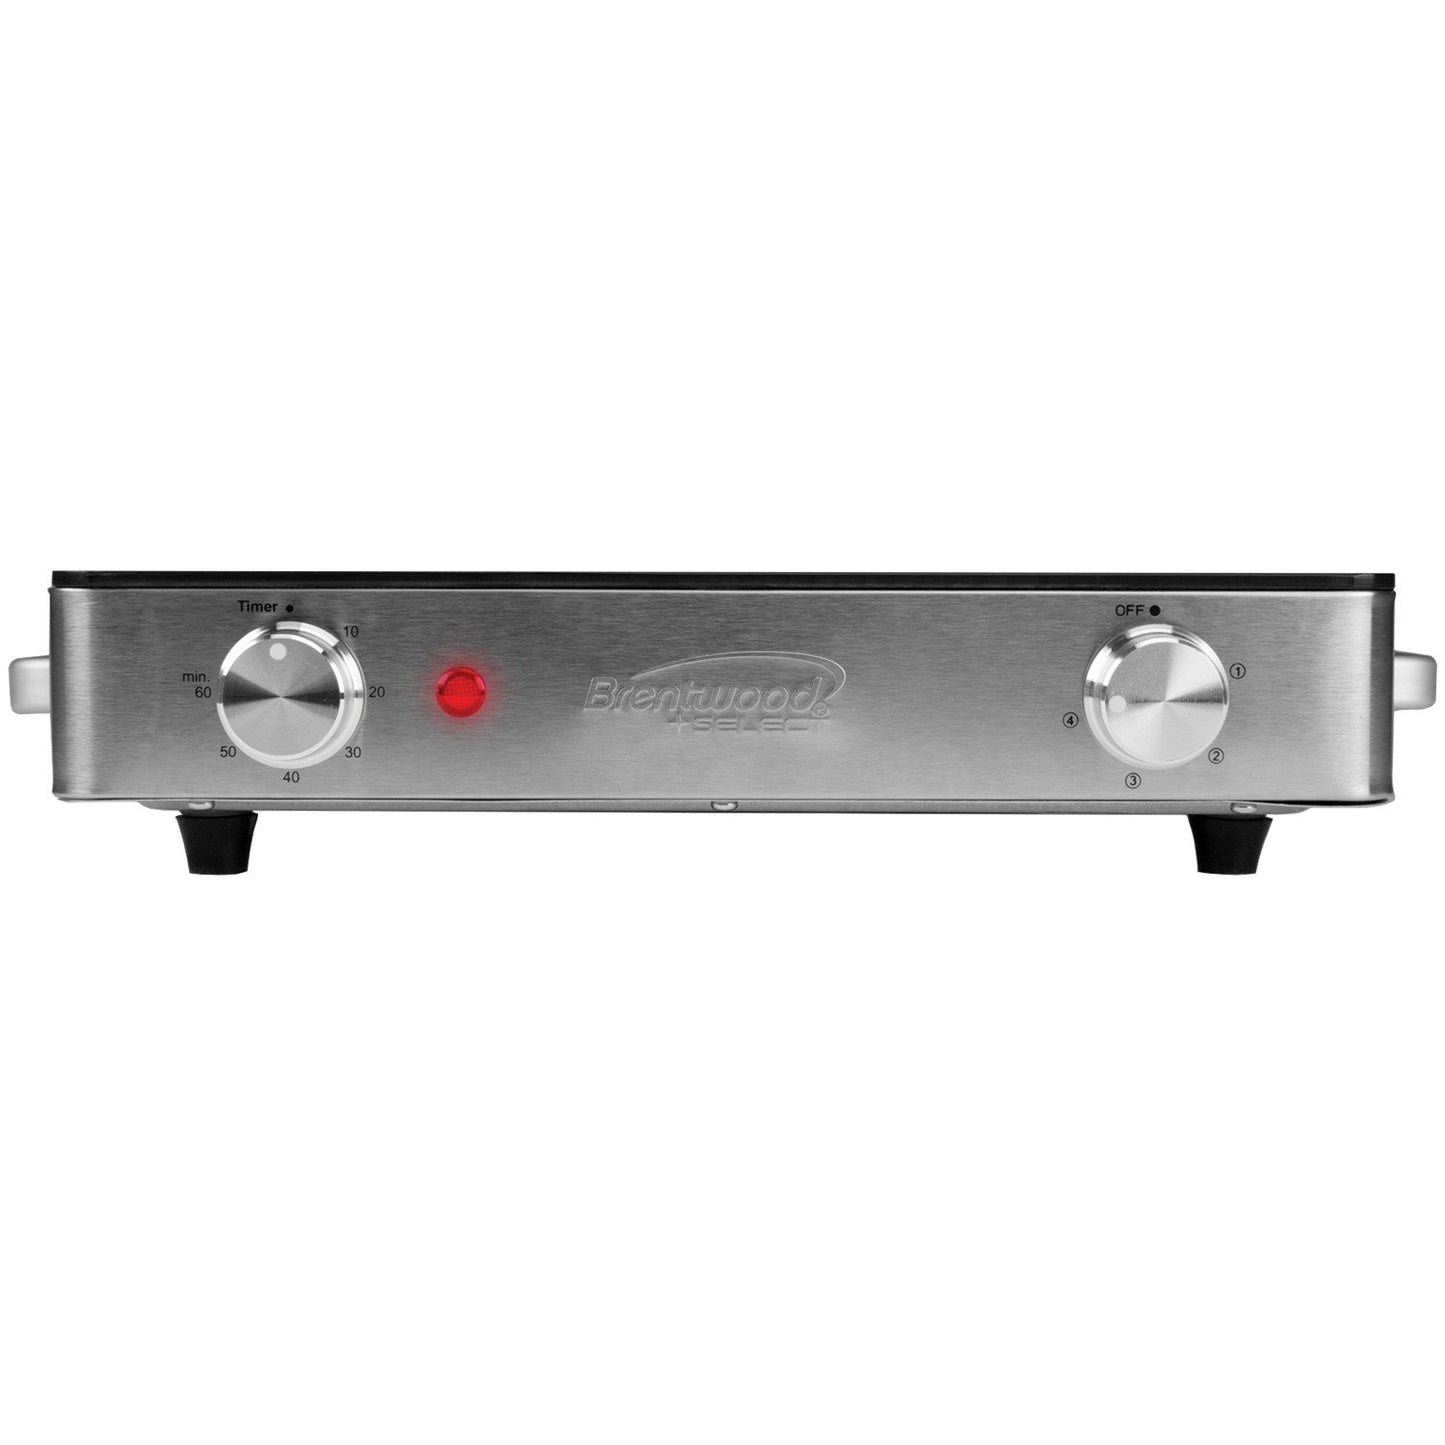 Brentwood Appl. TS-381 1,200W Single Infrared Electric Countertop Burner